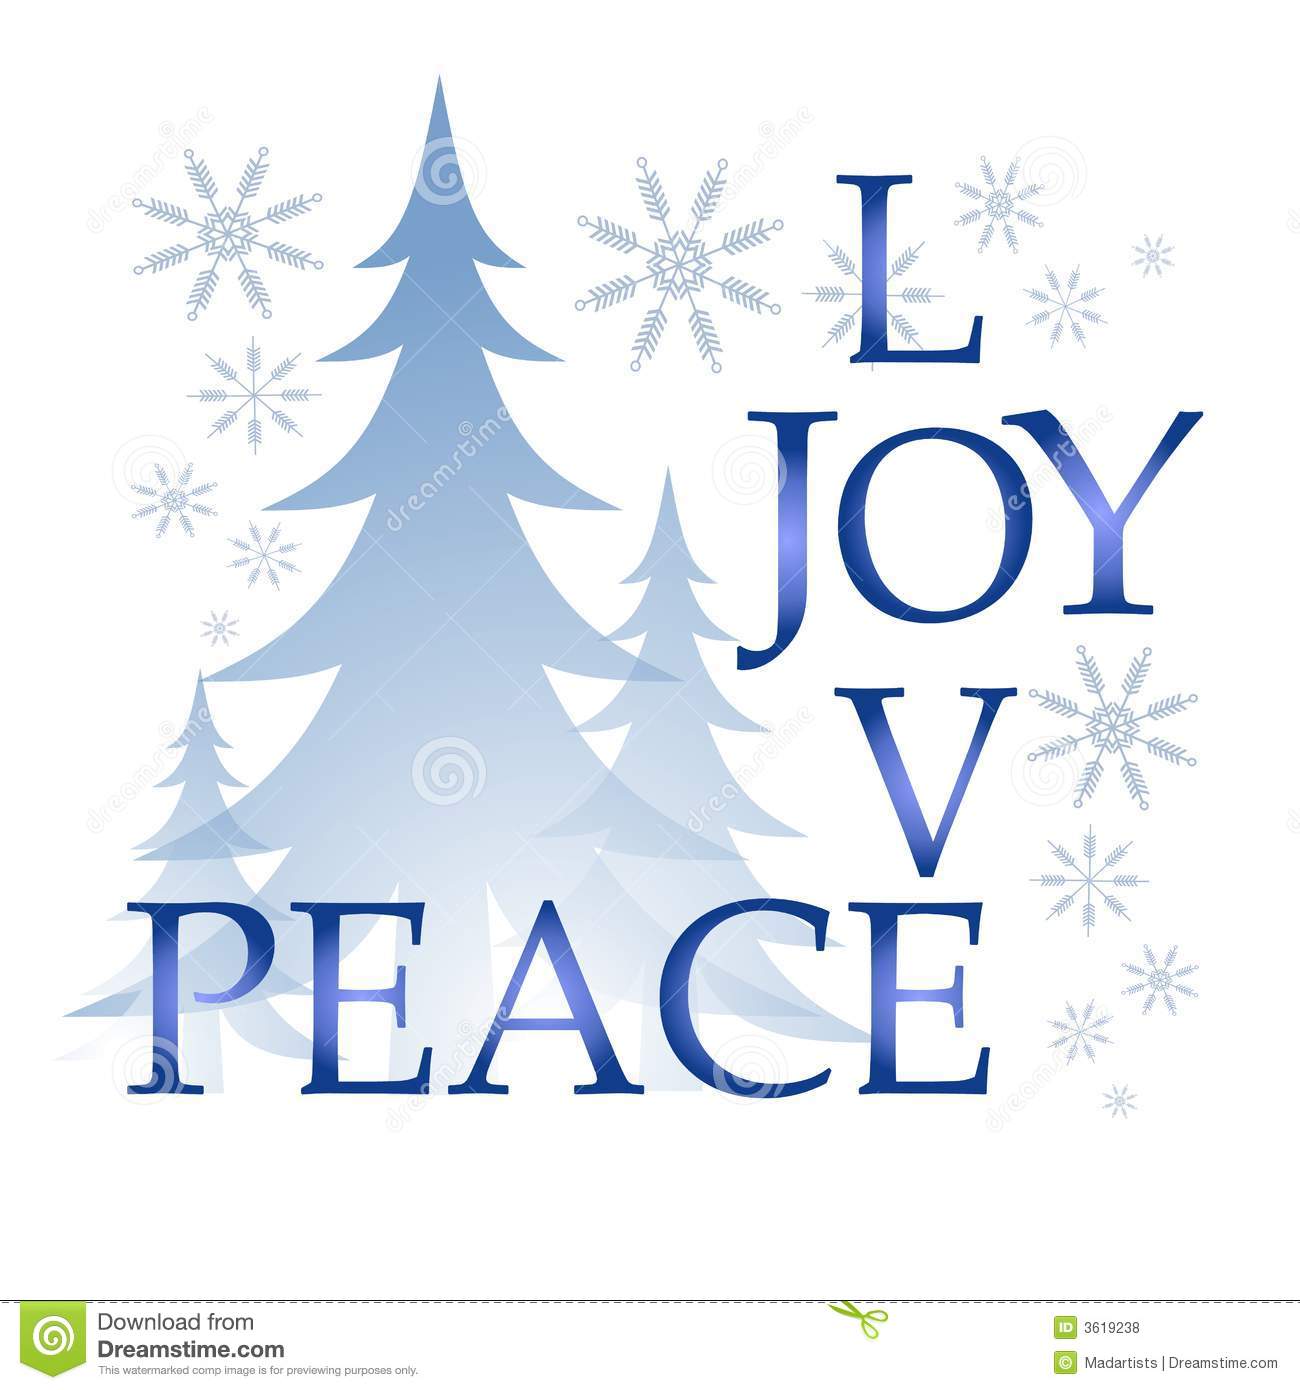 Clip Art Illustration Of The Words  Love Joy And Peace  Integrated